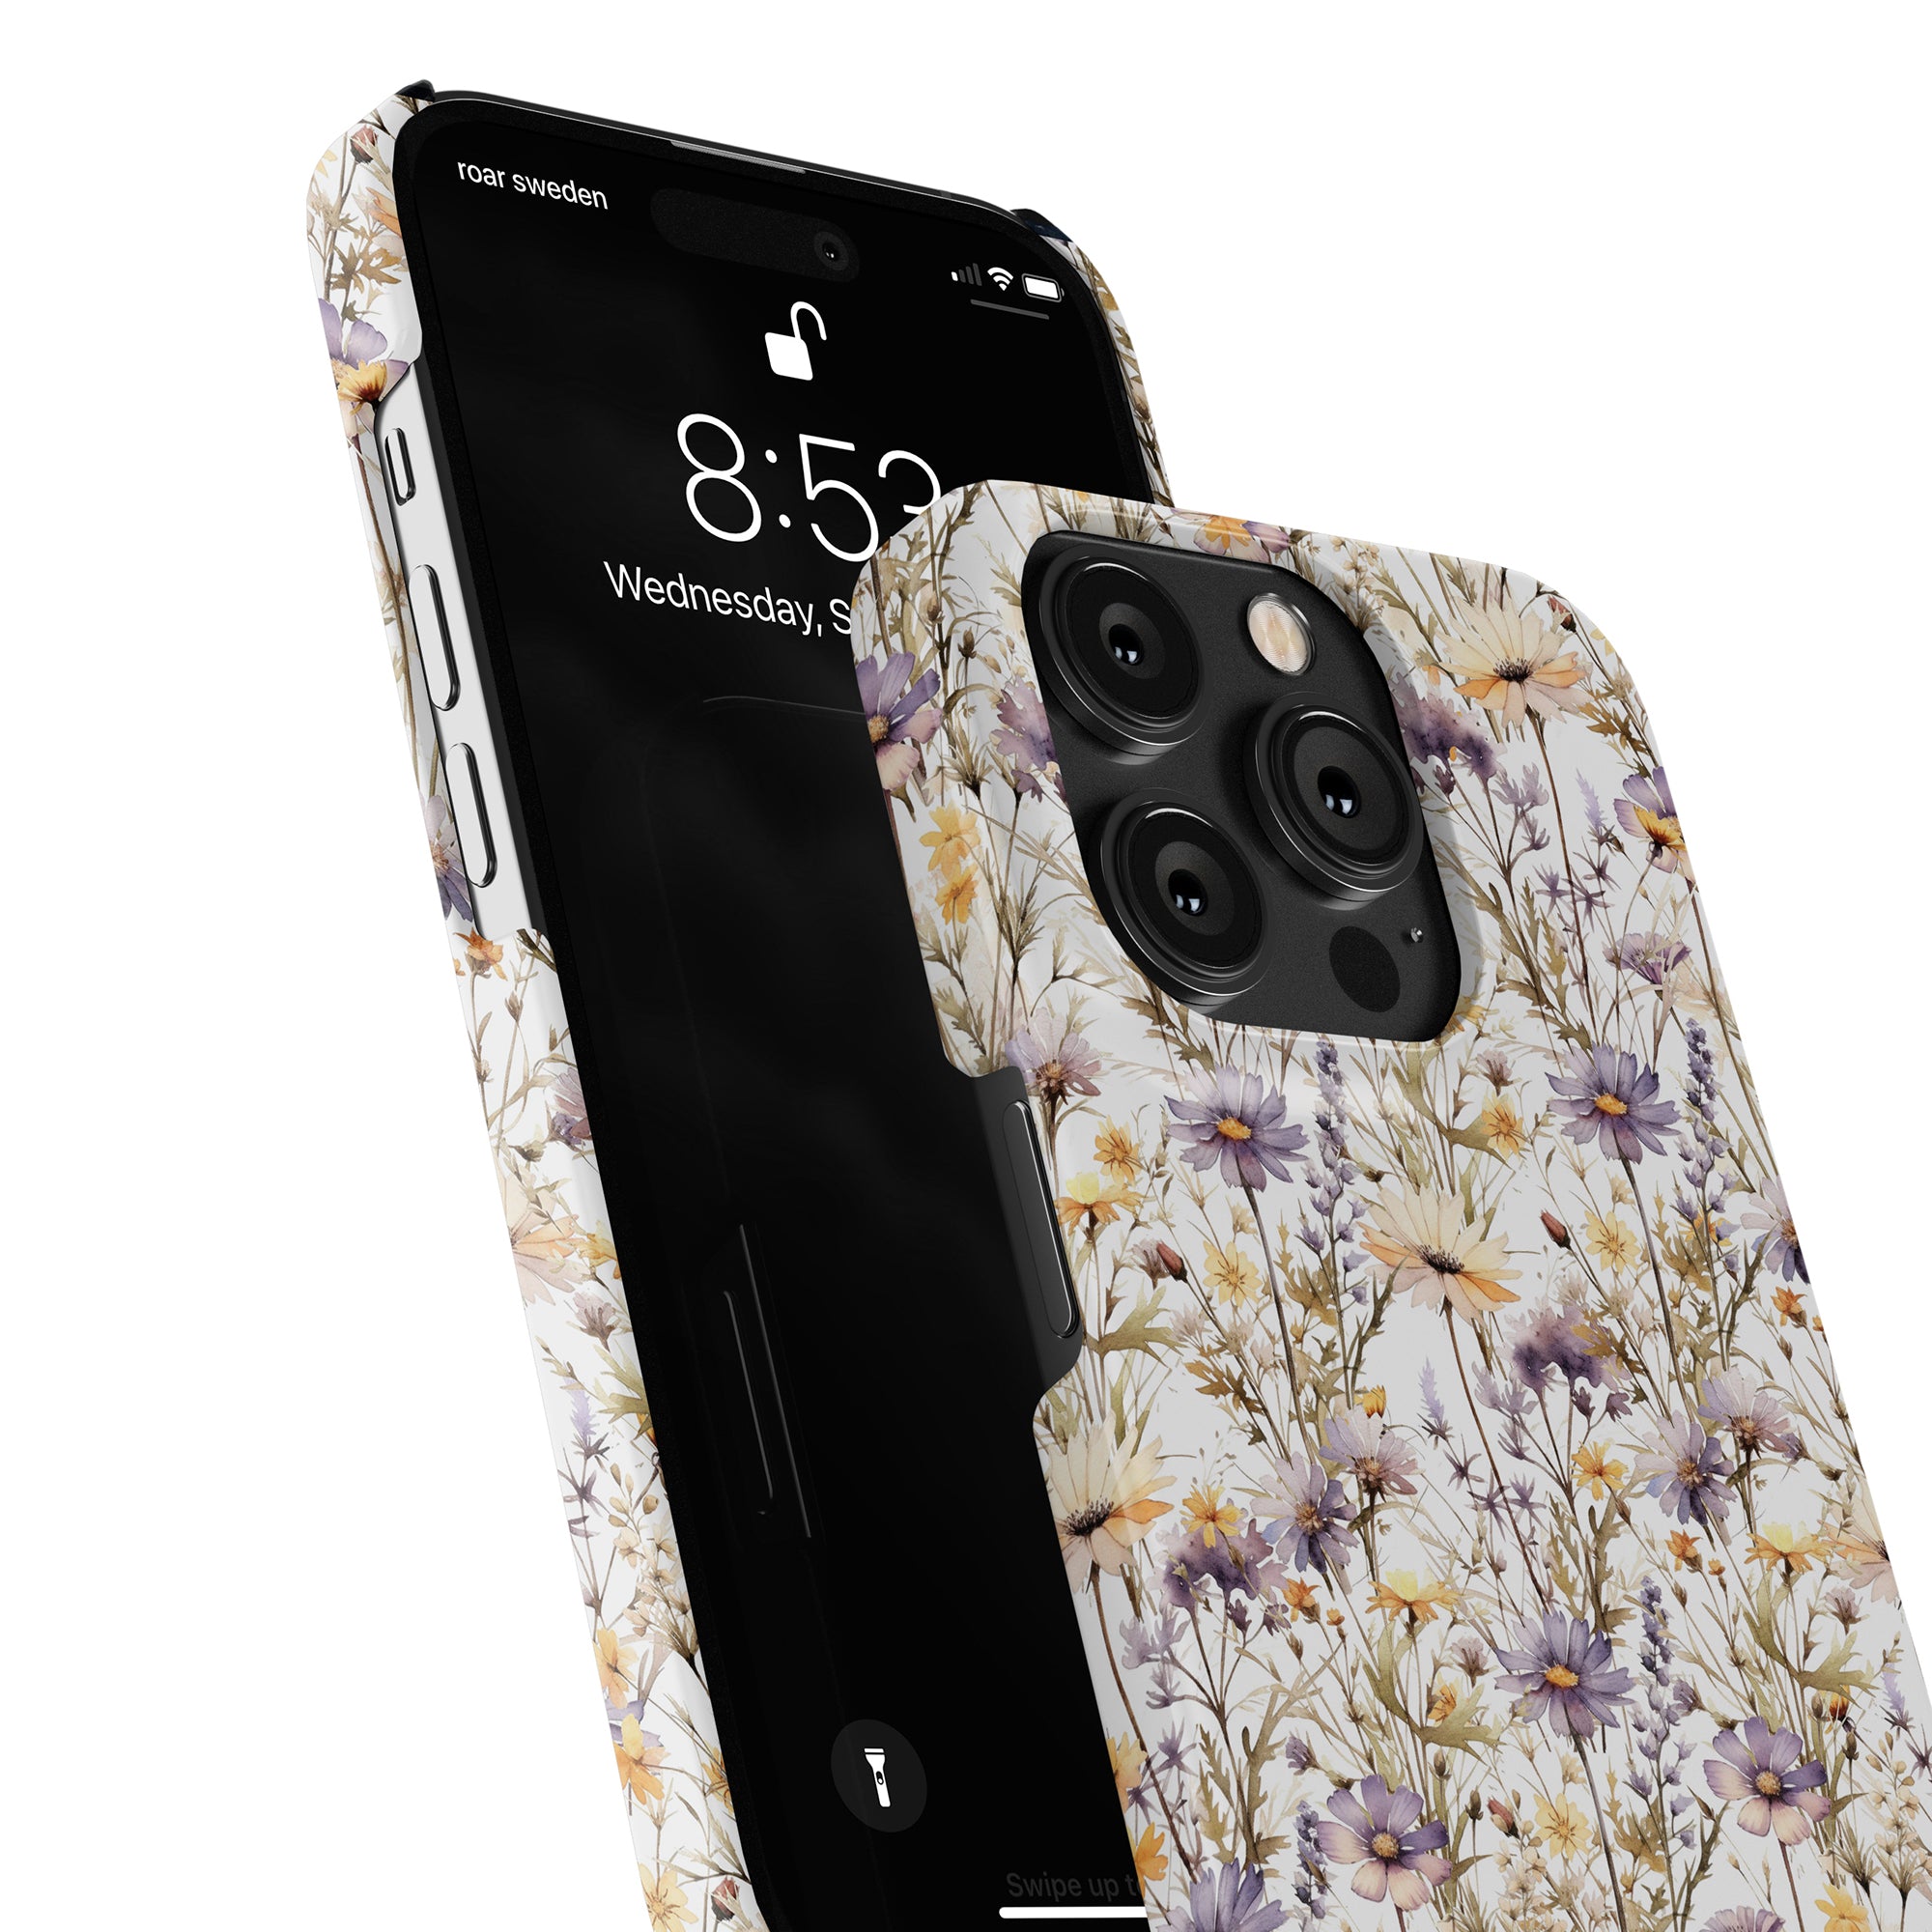 A close-up of a smartphone with a Purple Wildflower - Slim Case featuring a floral pattern. The phone's screen displays the time, 8:52, and the date, Wednesday, September 6.